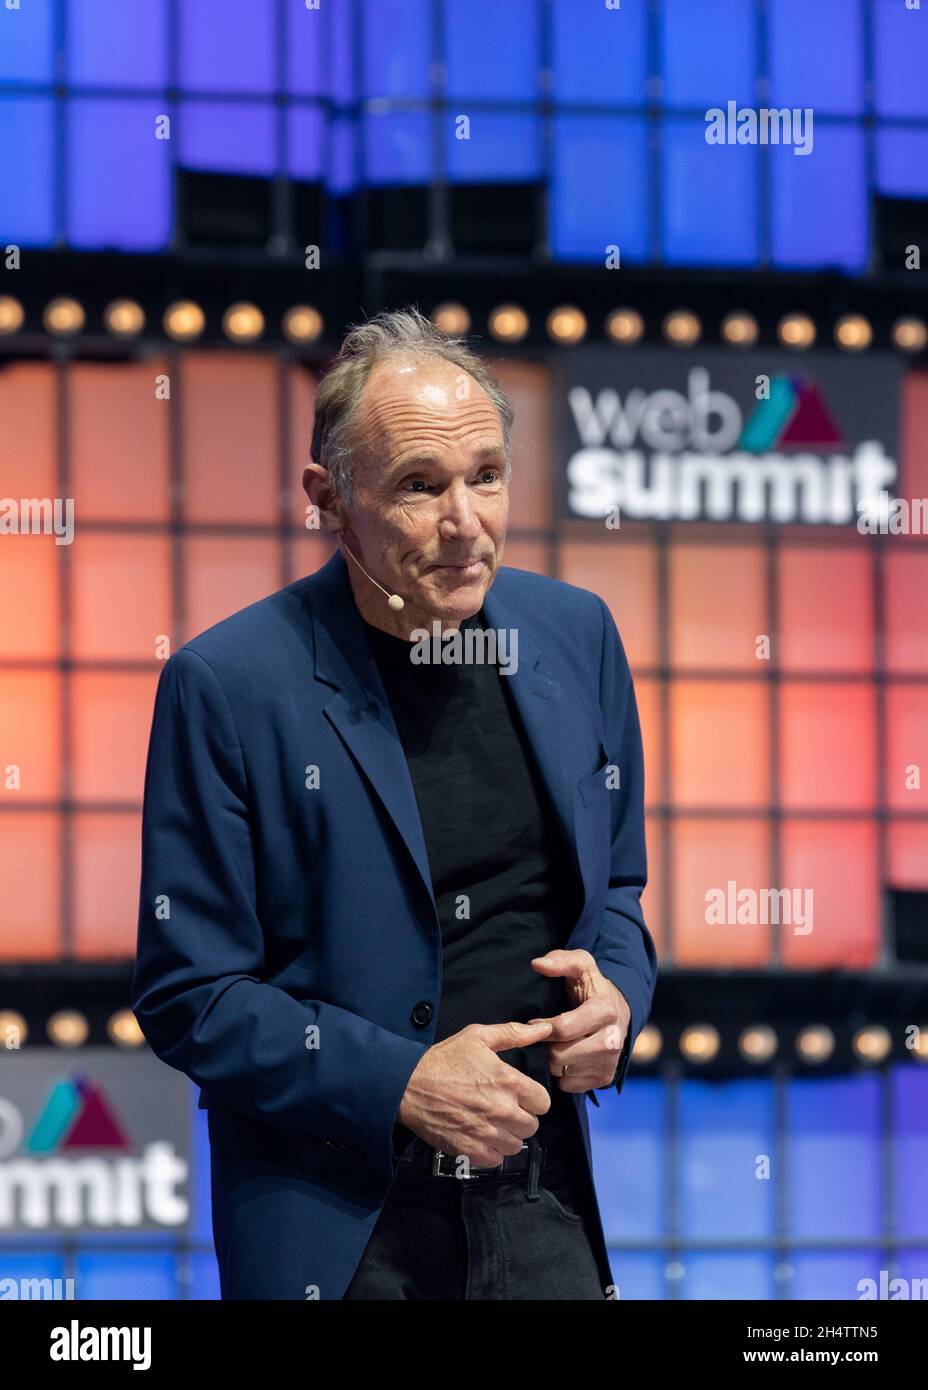 Lisbon, Portugal. 04th Nov, 2021. CTO and co-founder of Inrupt, Sir Tim  Berners-Lee addresses the audience at Altice Arena Centre Stage during the  closing session of the Web Summit 2021.This is one